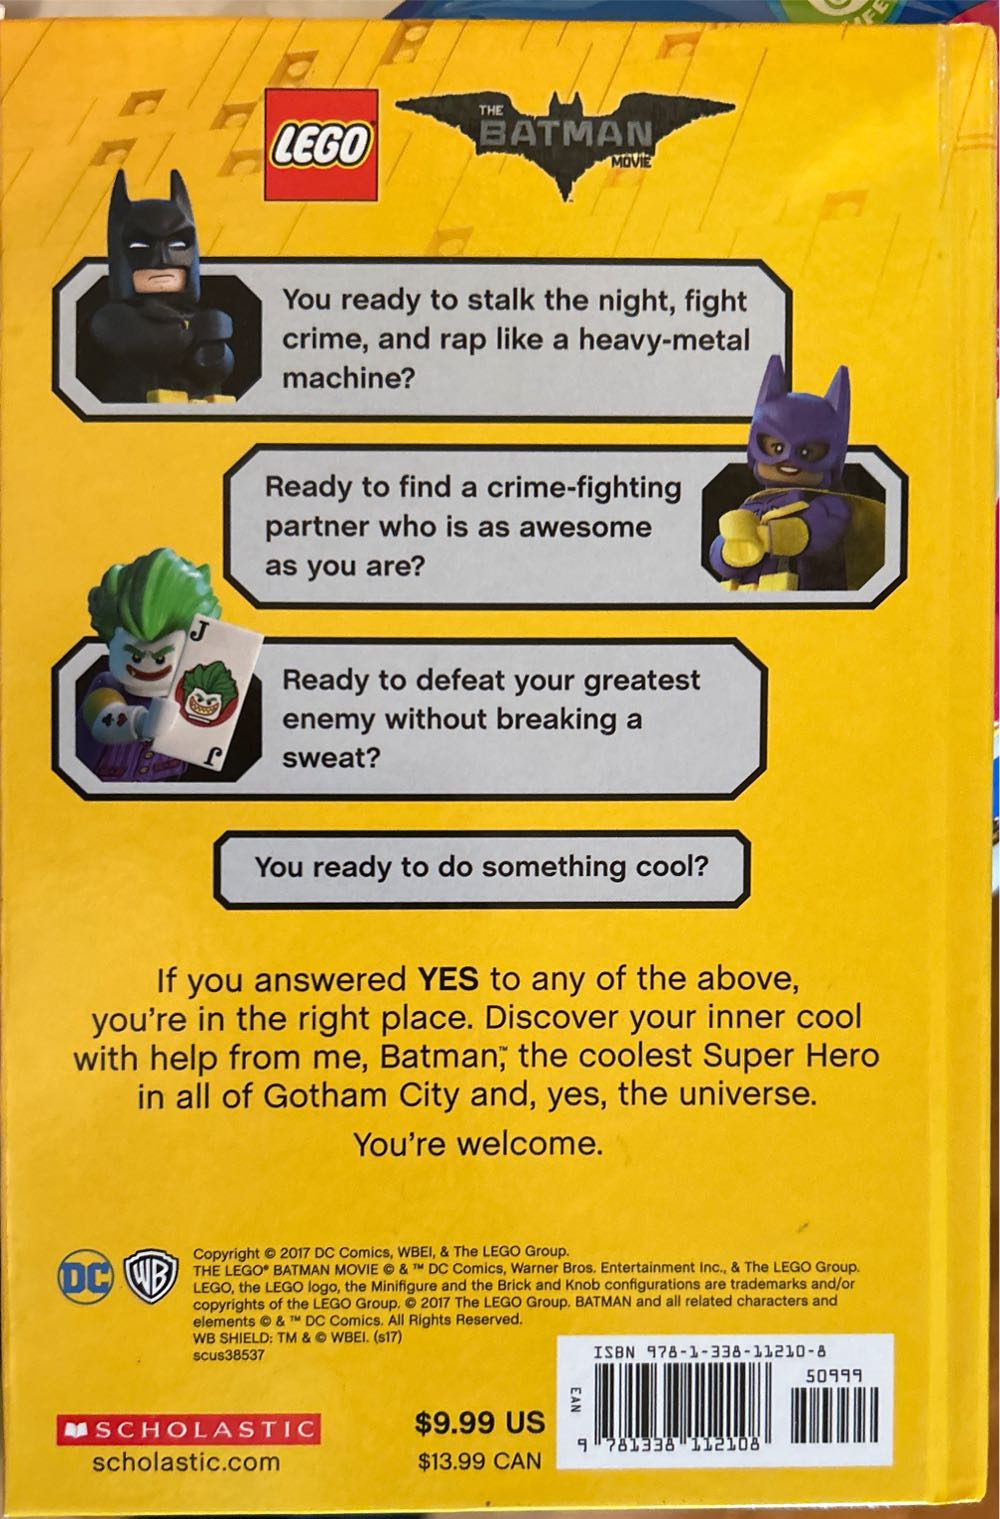 Batman’s Guide to Being Cool (Lego Batman Movie) - Howie Dewin (Scholastic Inc - Hardcover) book collectible [Barcode 9781338112108] - Main Image 2